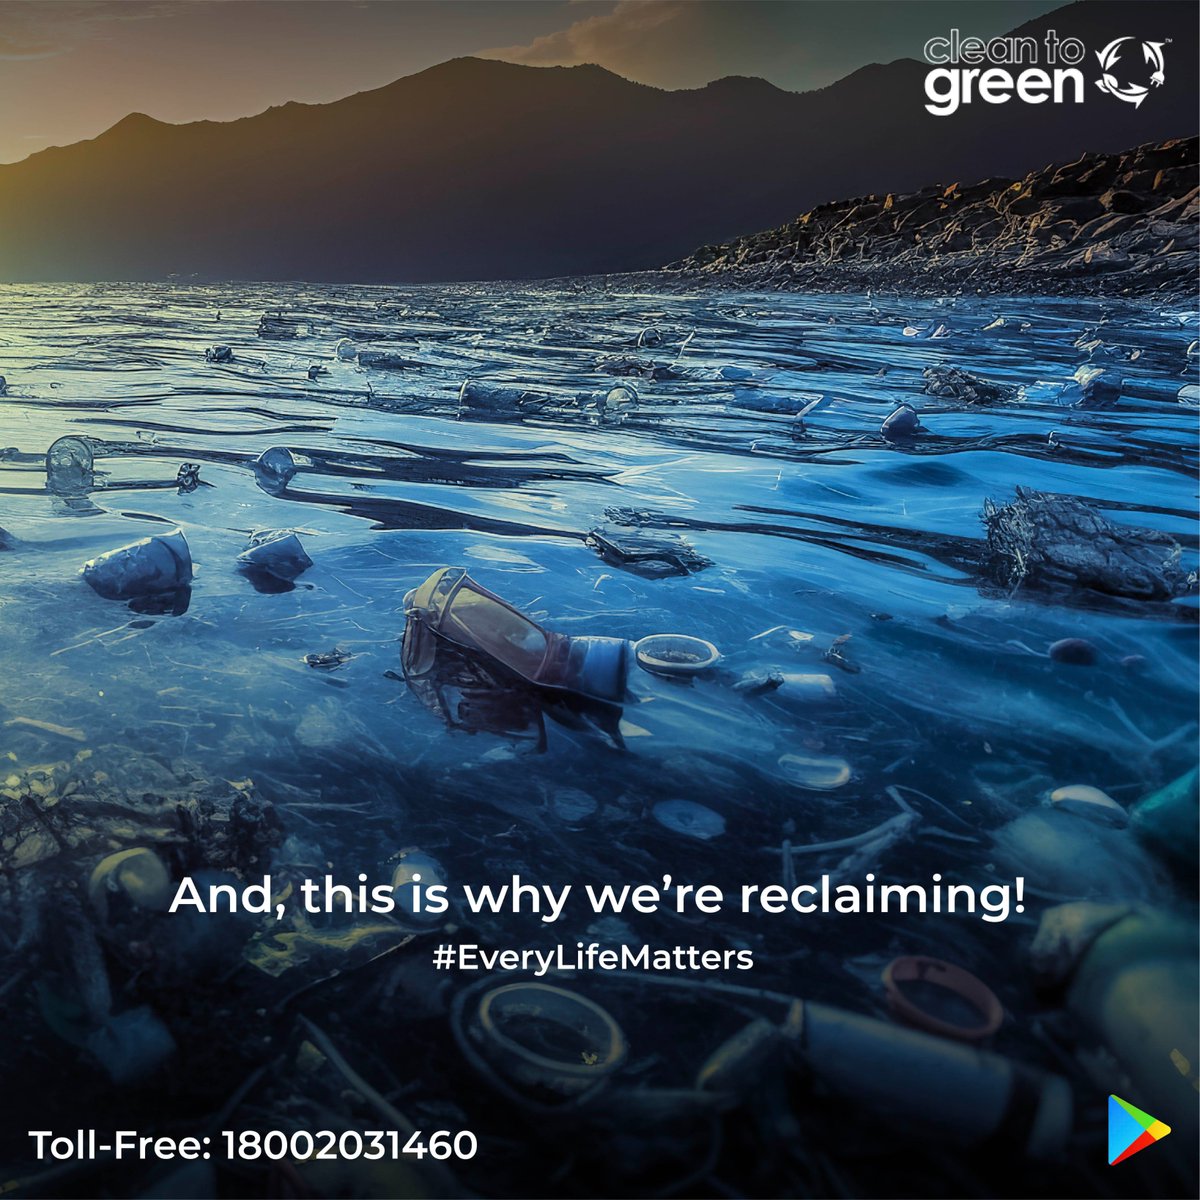 We're reclaiming our waste because our planet deserves better. 
To recycle your waste, take the first step – download the Clean2Green App on your Android phone today or call us at our toll-free number. 

#RecycleForEarth #Clean2Green